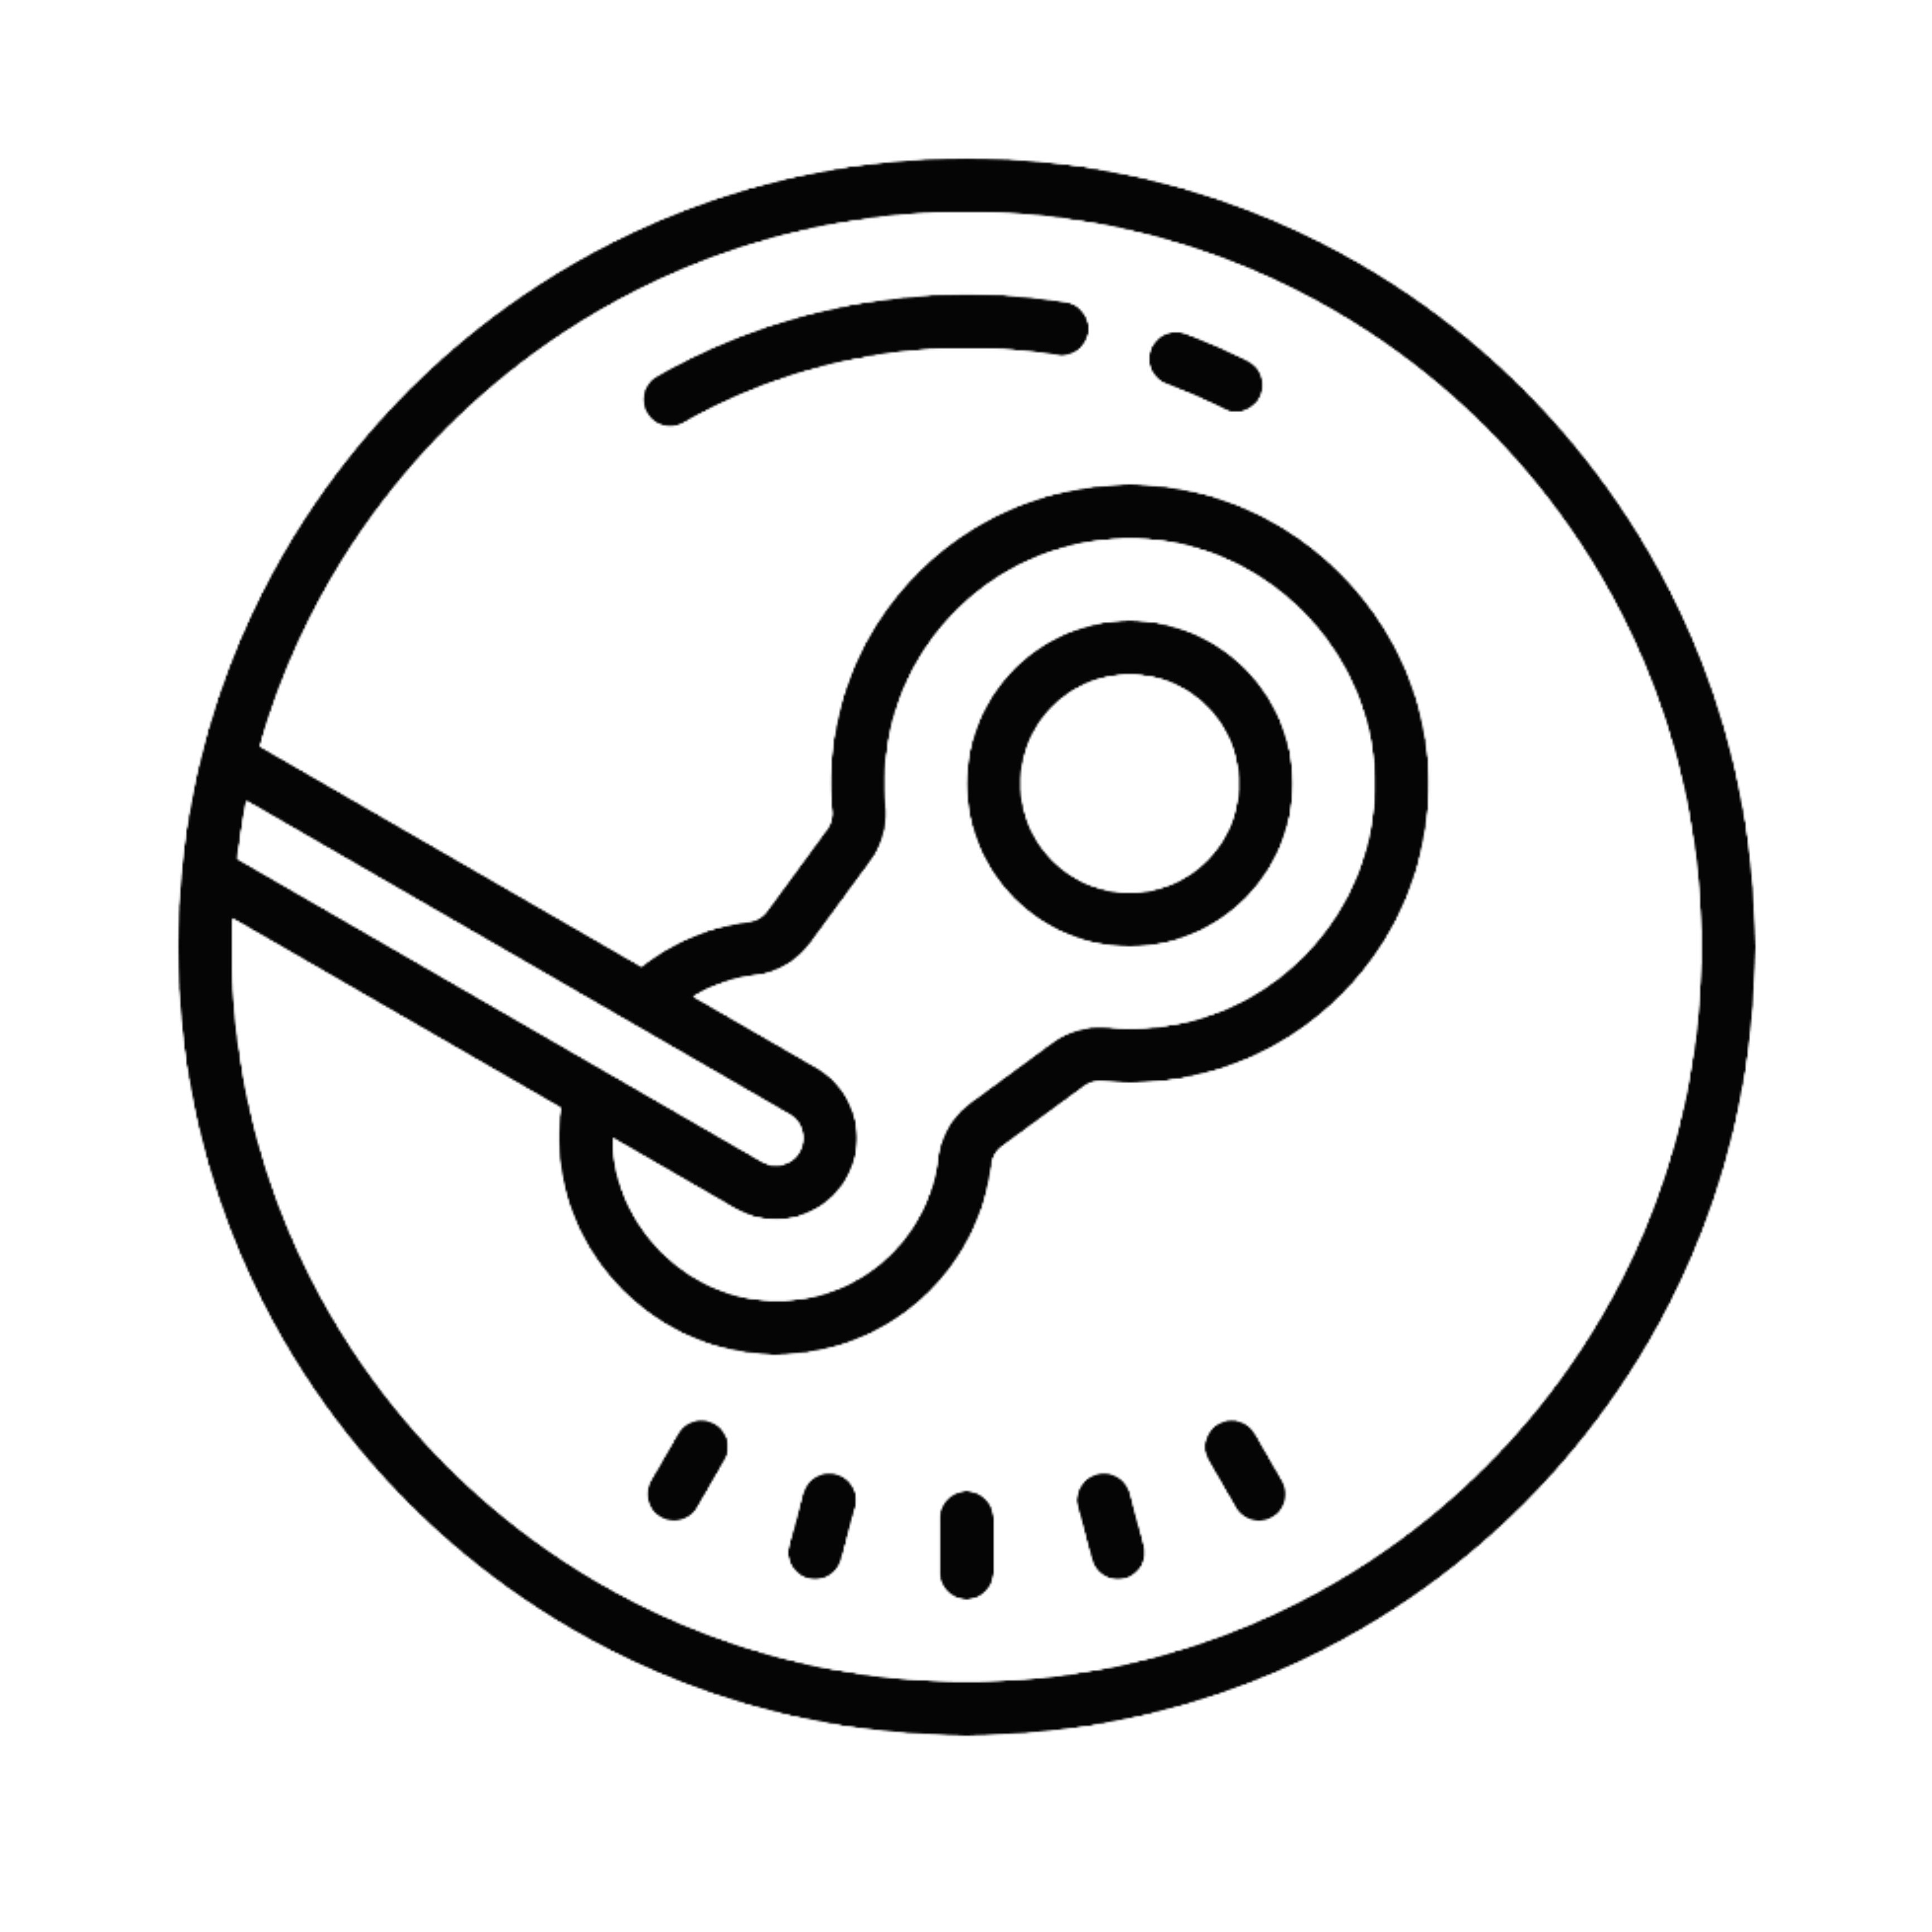 All steam icons gone фото 24